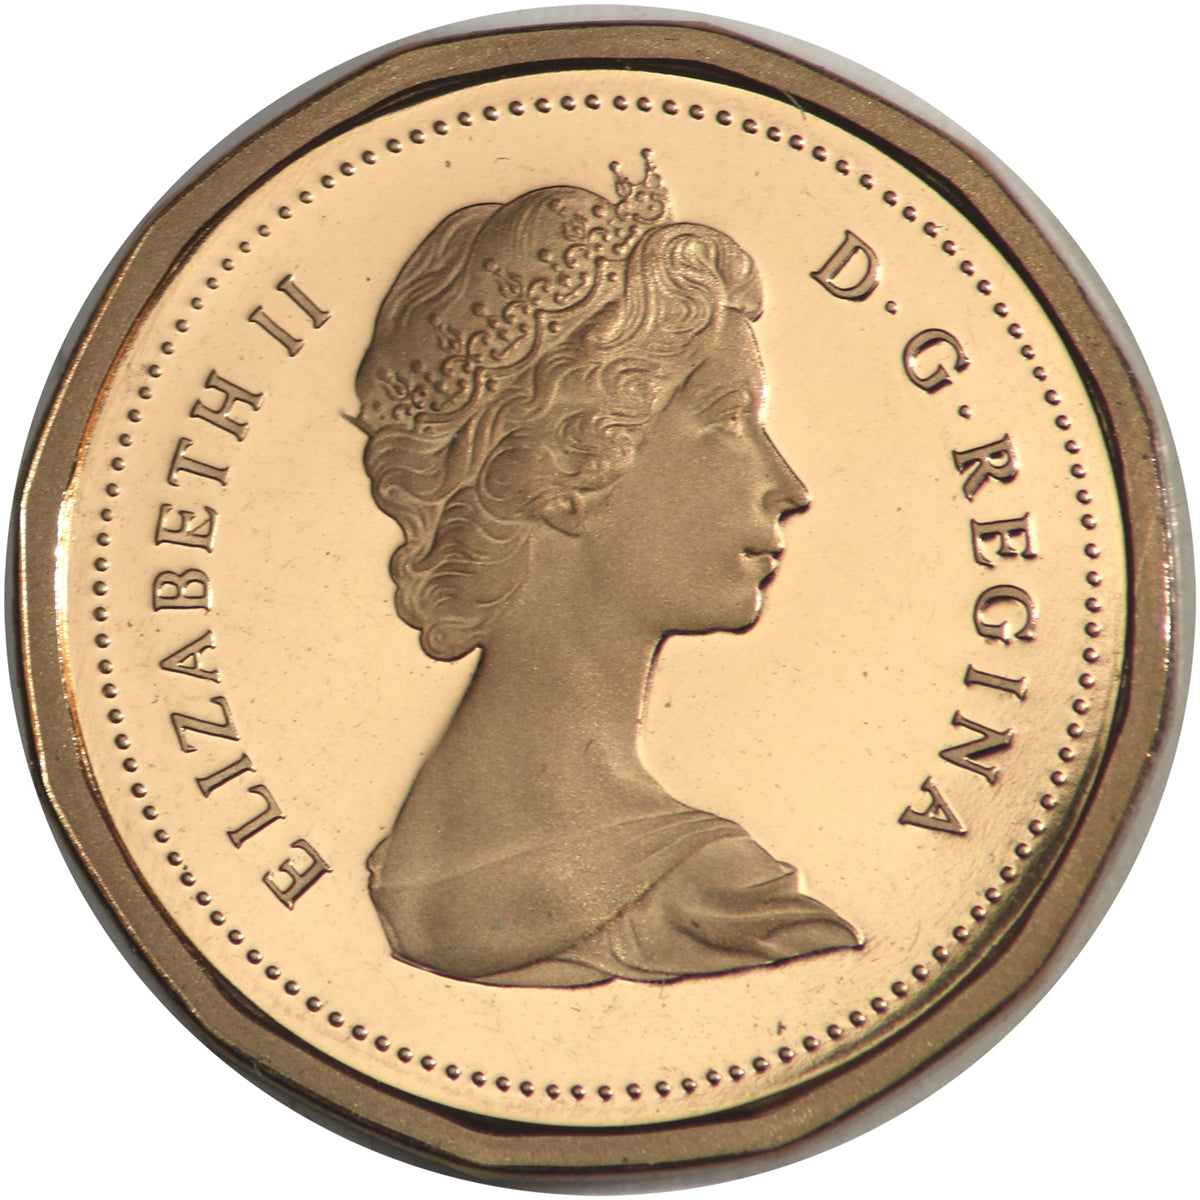 1983 Canada 1-cent Proof